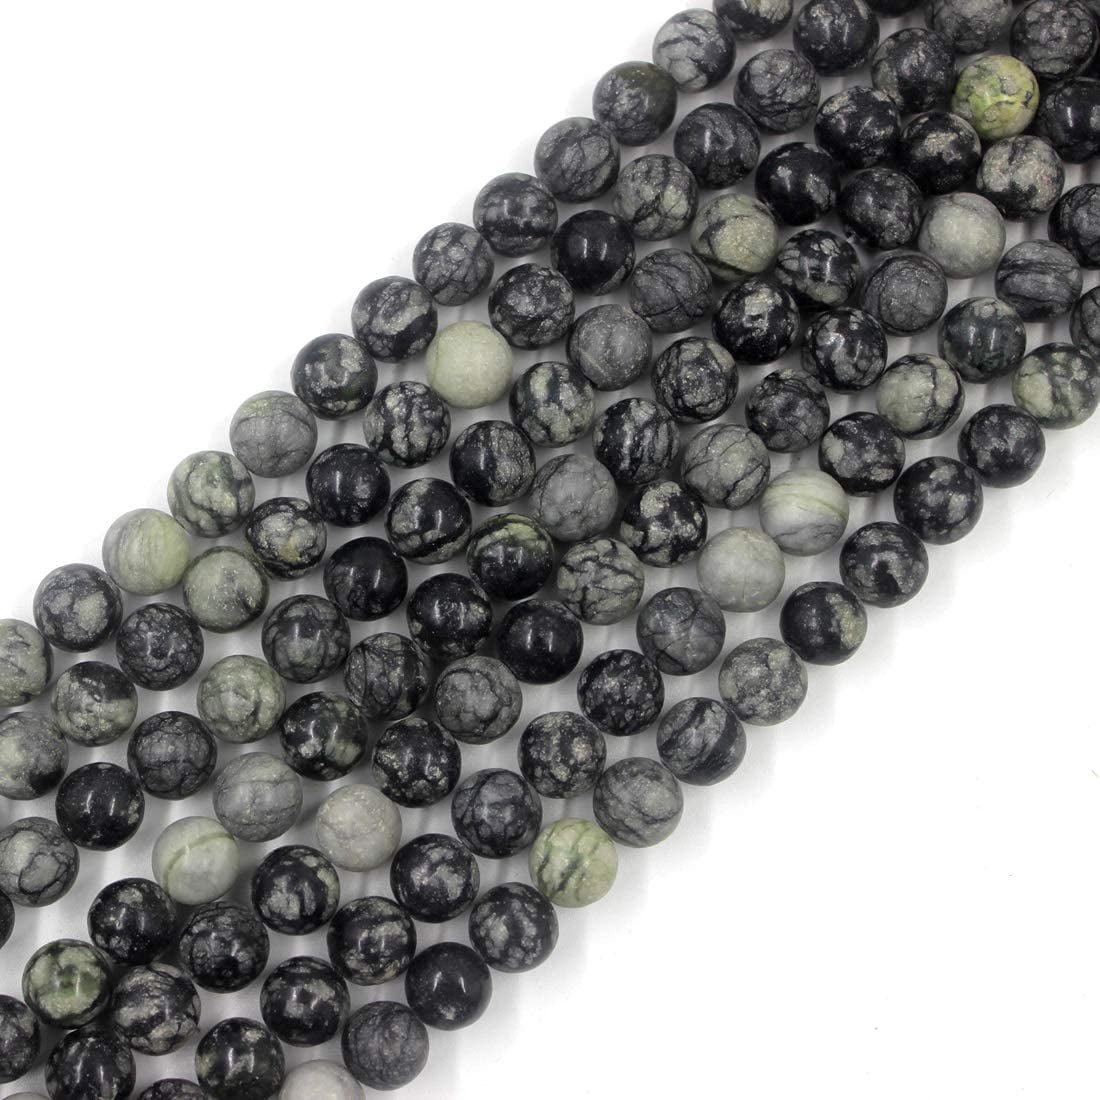 Natural Frosted Matte Jasper Gemstone Round Loose Beads for Jewelry Making 15'' 